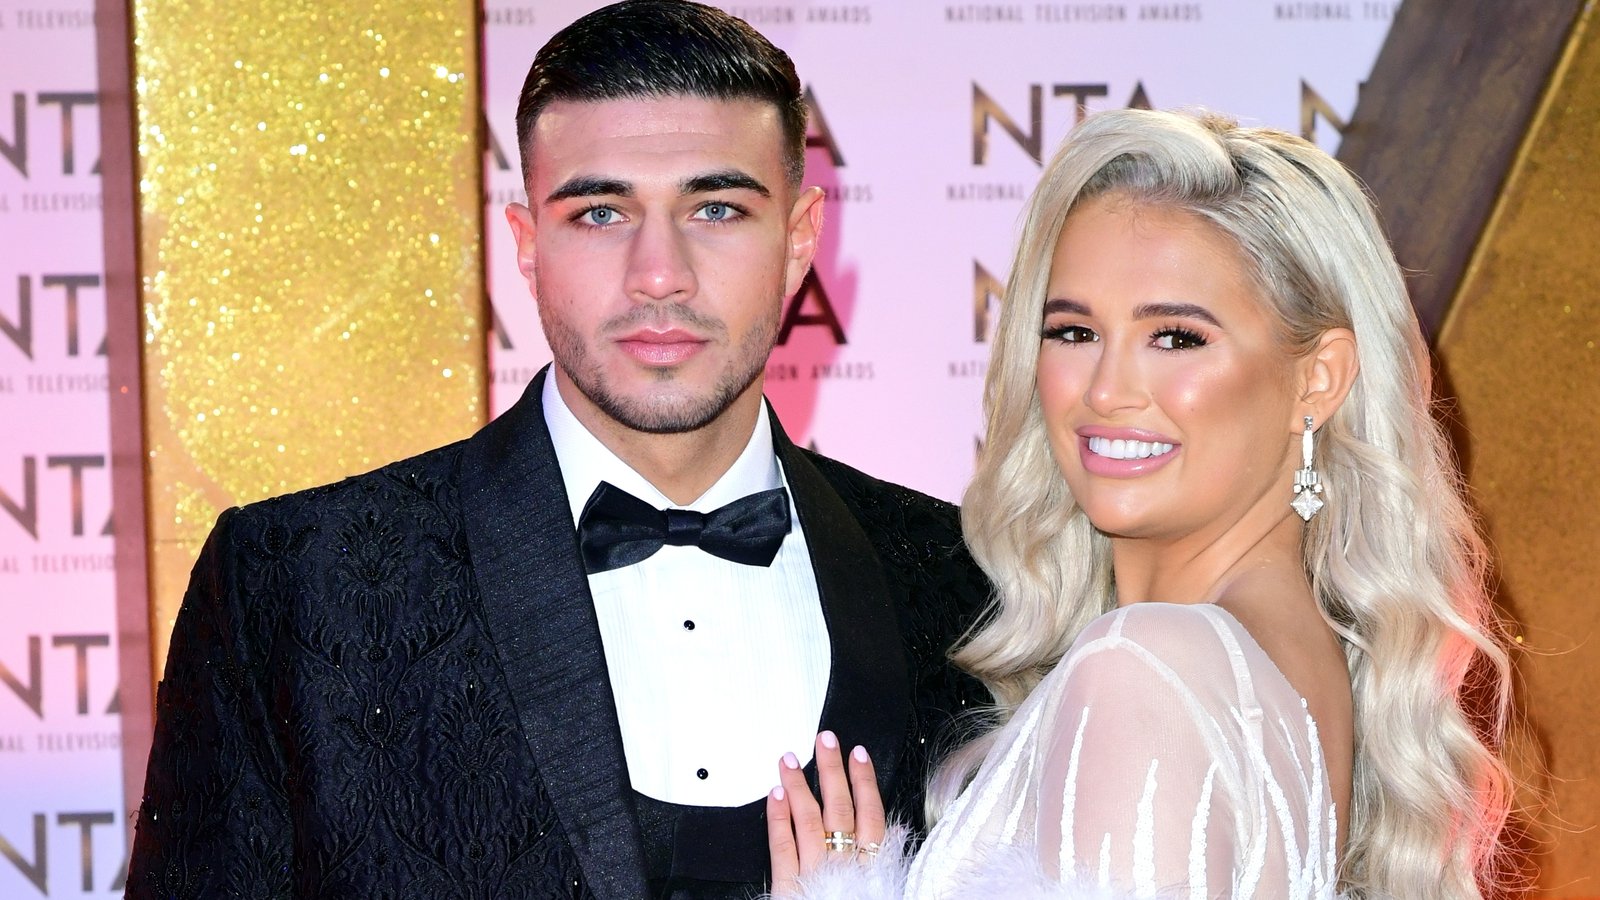 Love Island S Molly Mae Hague And Tommy Fury To Wed